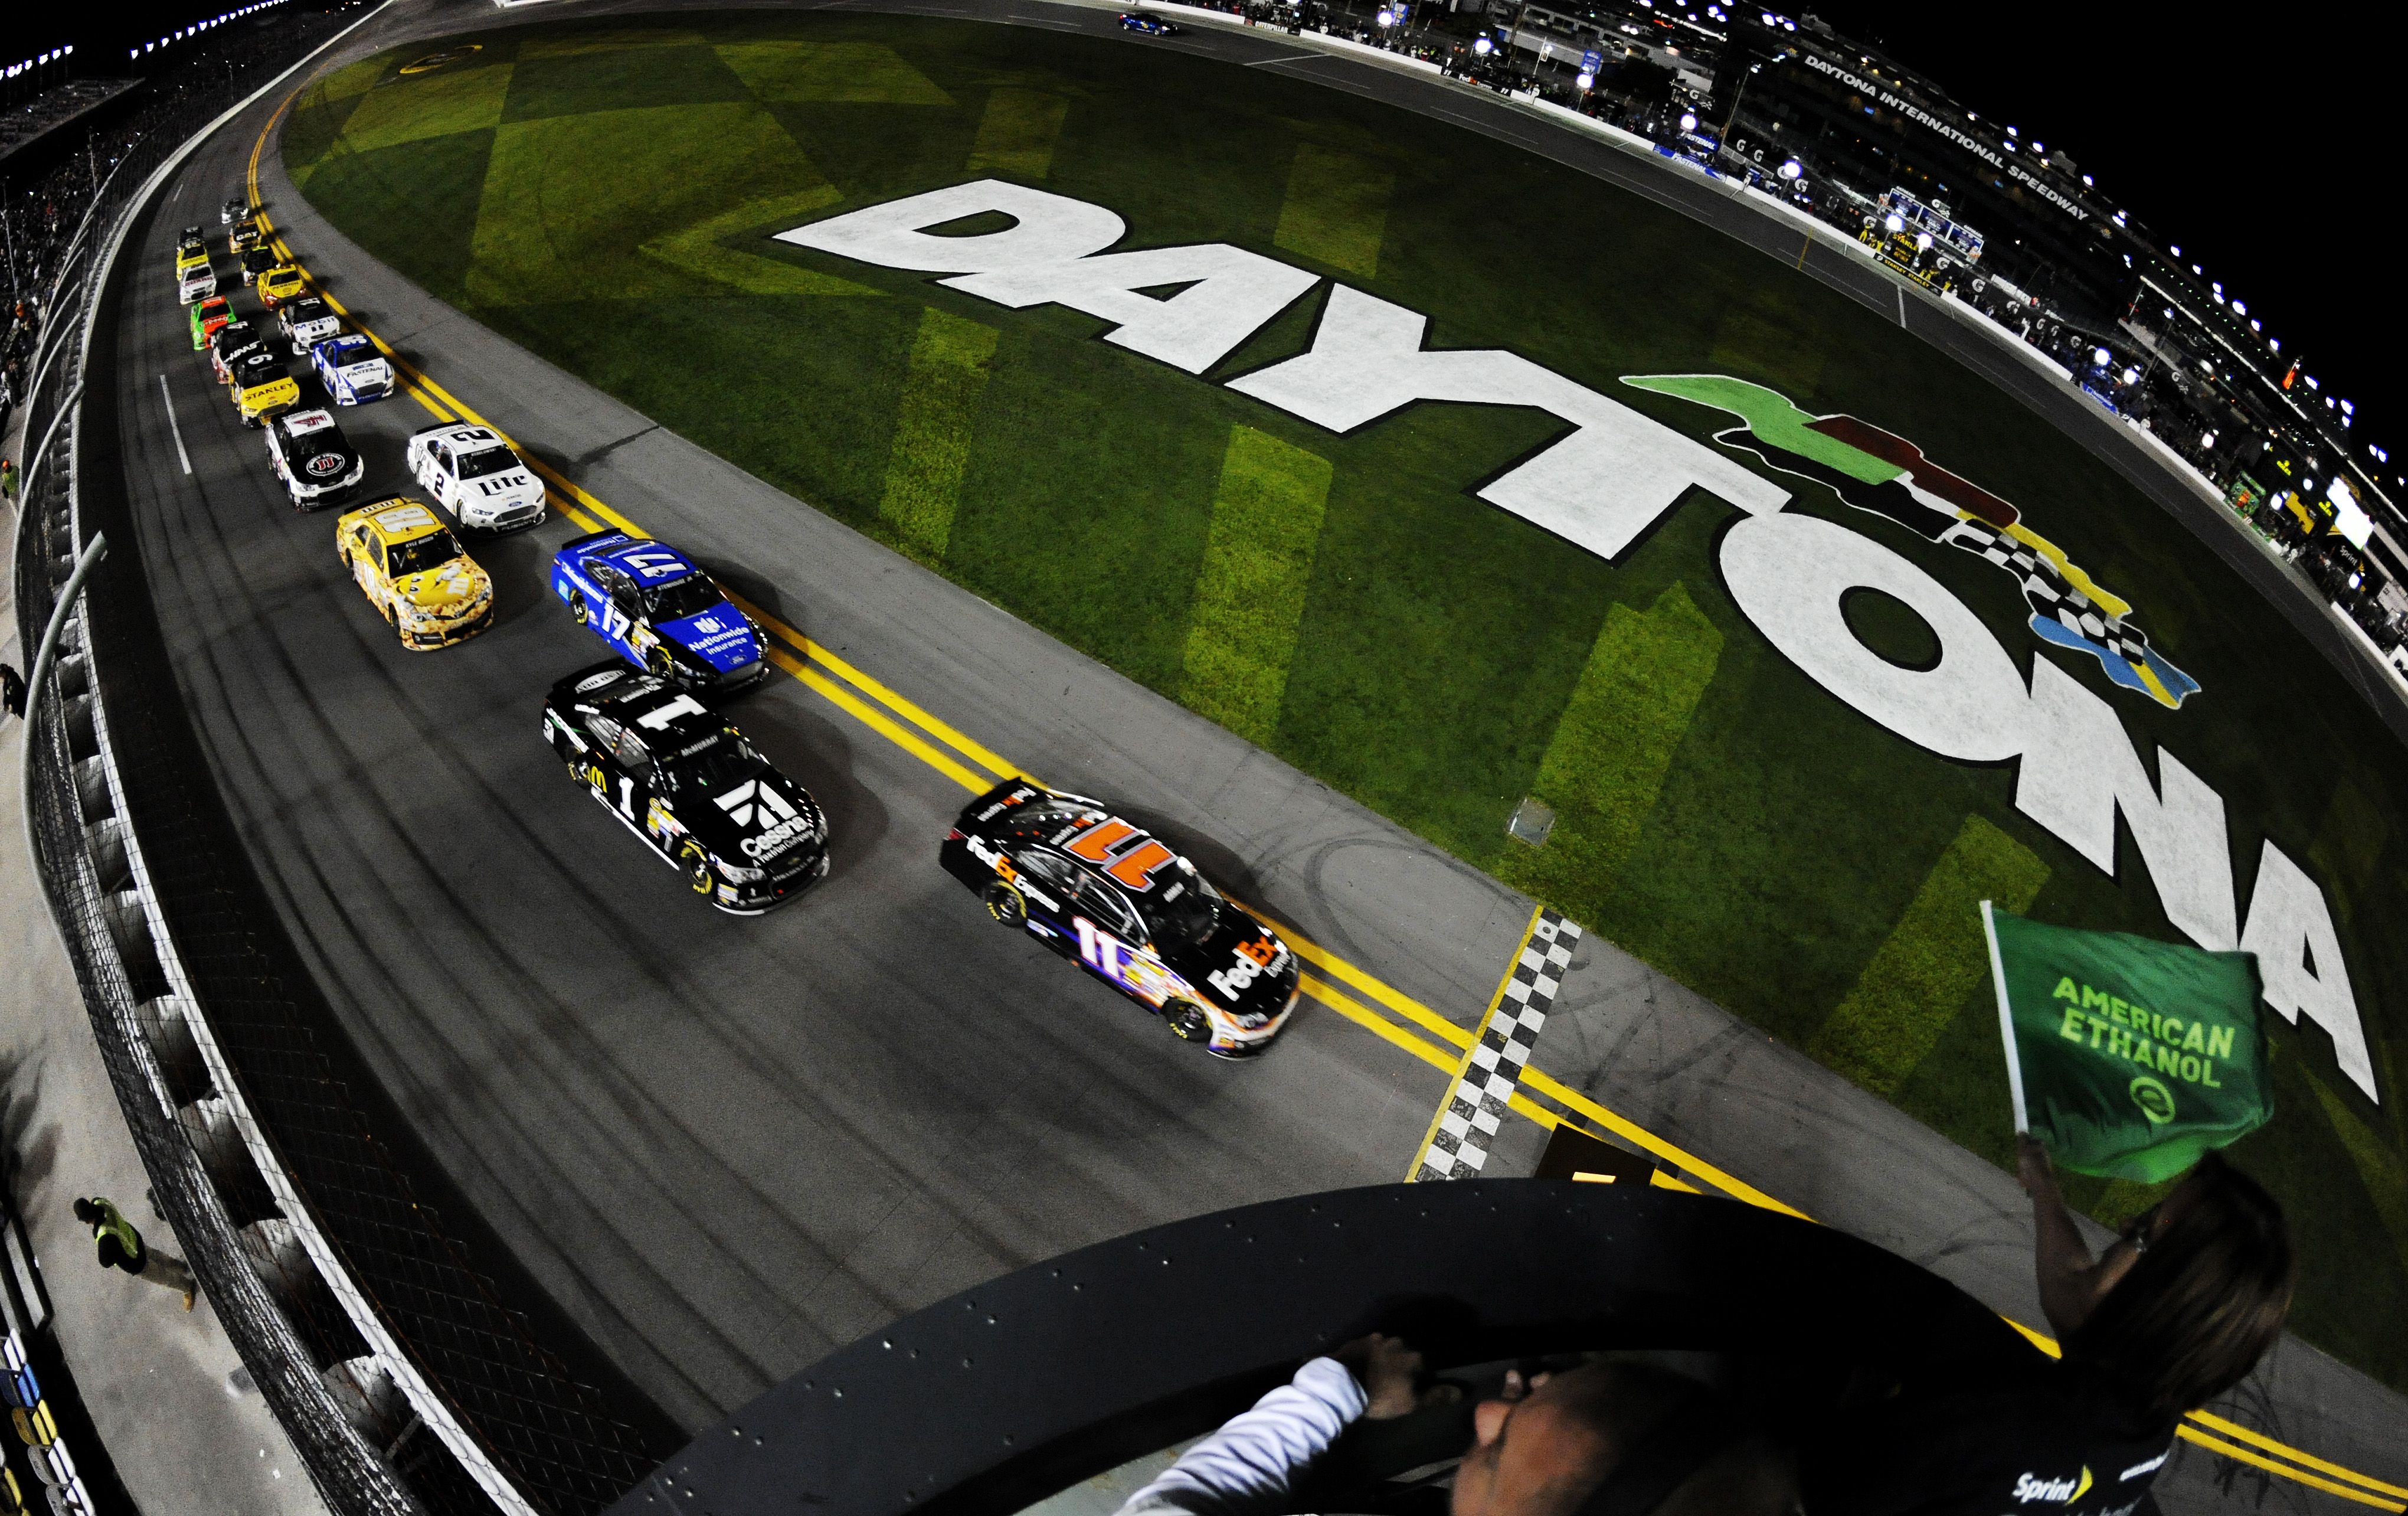 After nearly three months of waiting, the 2014 NASCAR season has gone green.  Speedweeks is here from Daytona.